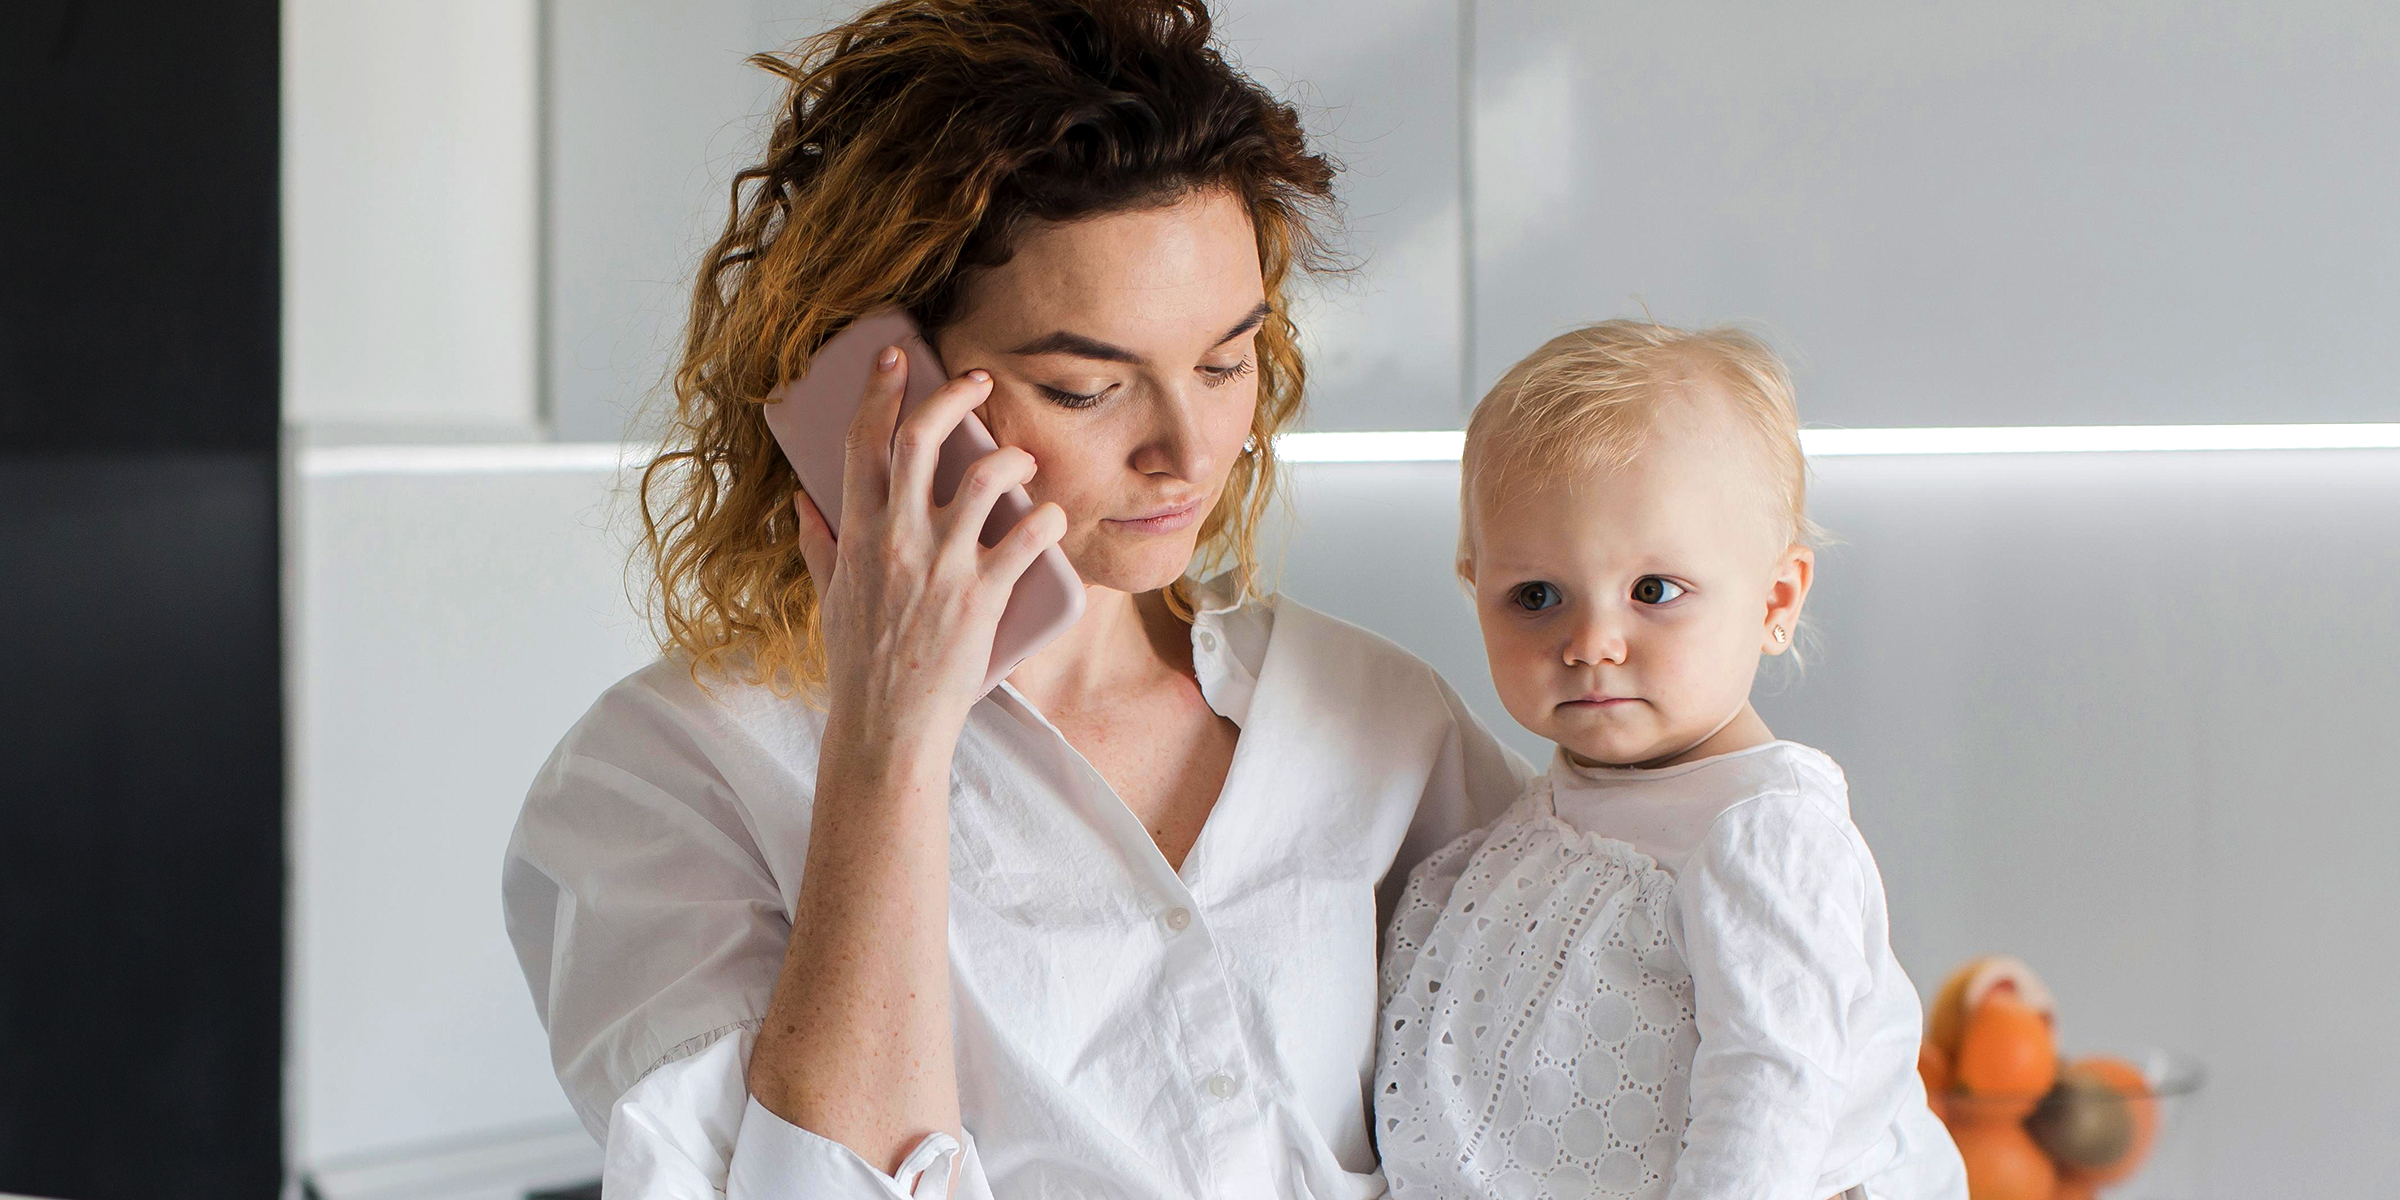 A woman with a baby talking on the phone | Source: Freepik